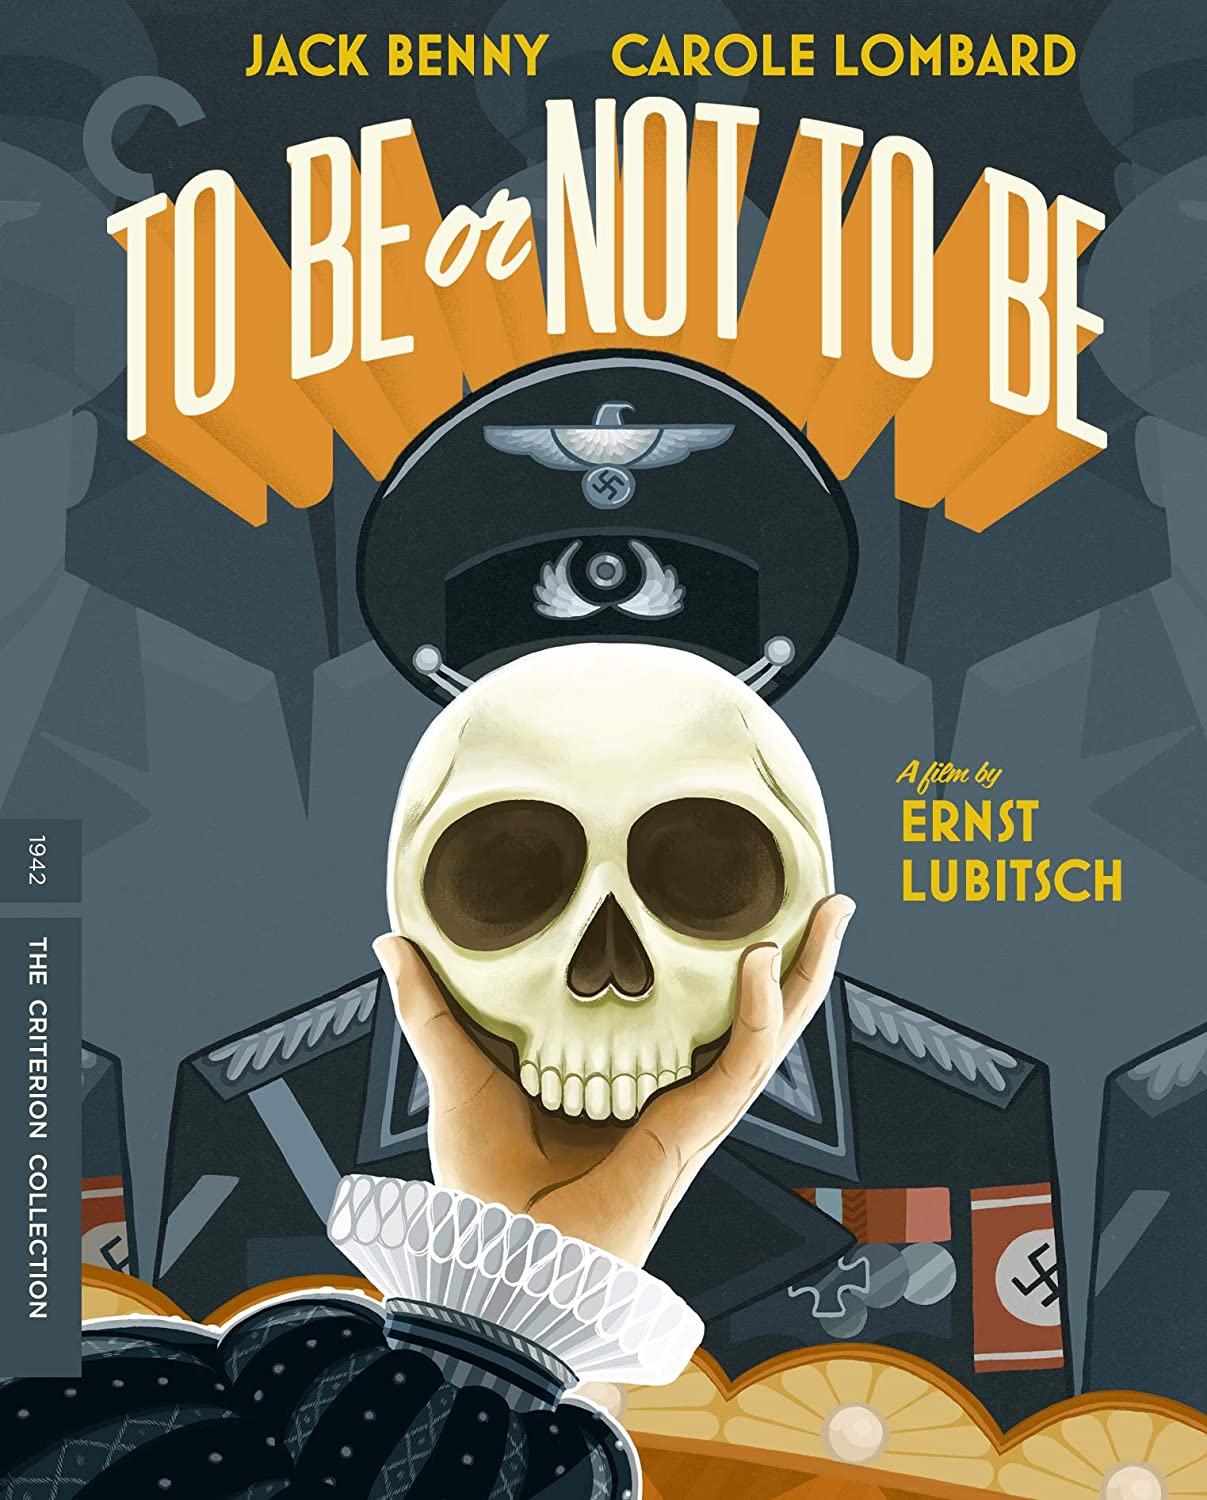 To Be Or Not To Be (1942) starring Jack Benny, Robert Stack, Carole Lombard, Sig Ruman, Stanley Ridges, directed by Ernst Lubitsch